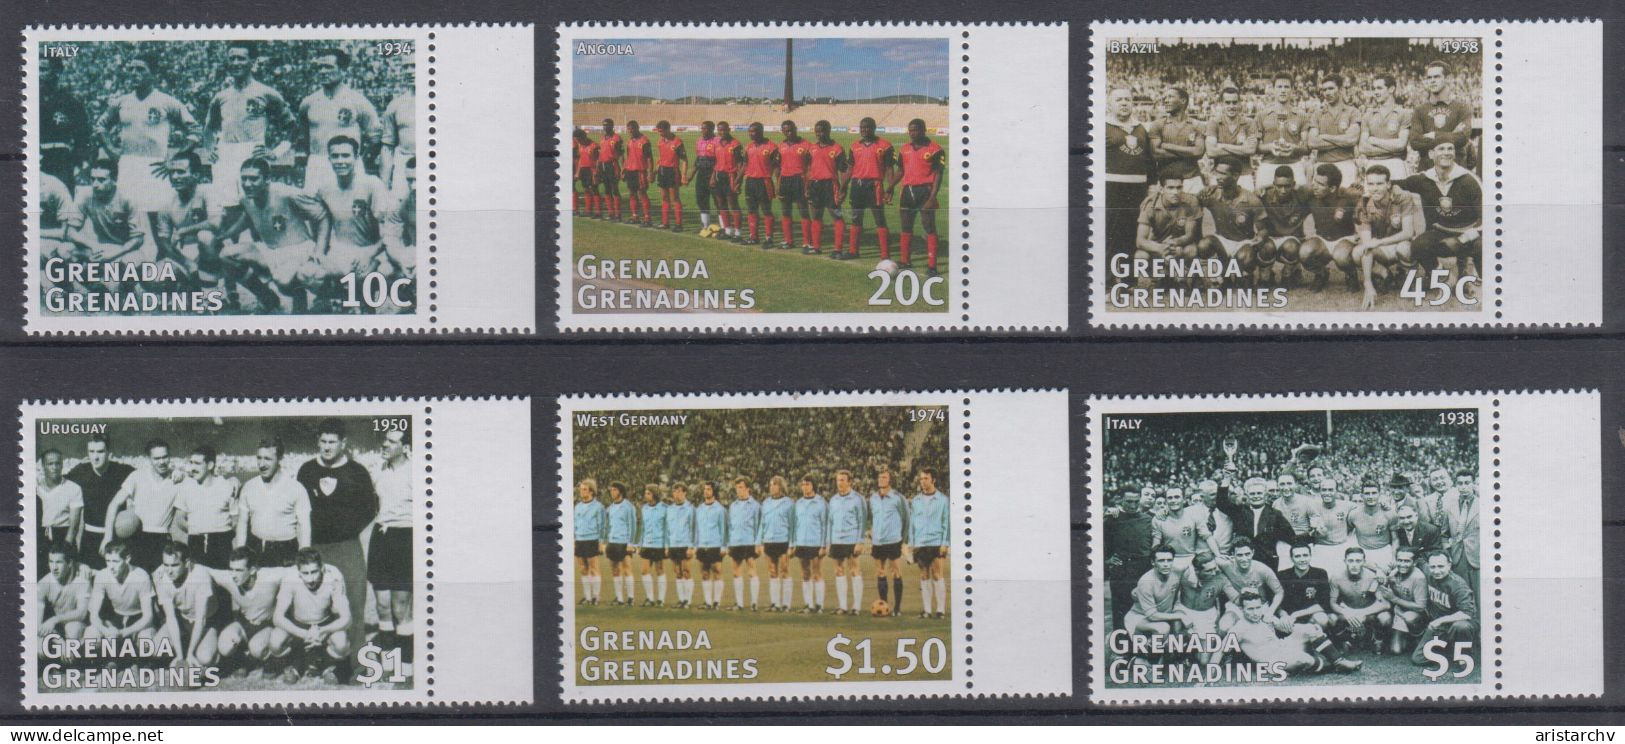 GRENADA GRENADINES 1998 FOOTBALL WORLD CUP 2 S/SHEETS 2 SHEETLETS AND 6 STAMPS - 1998 – France